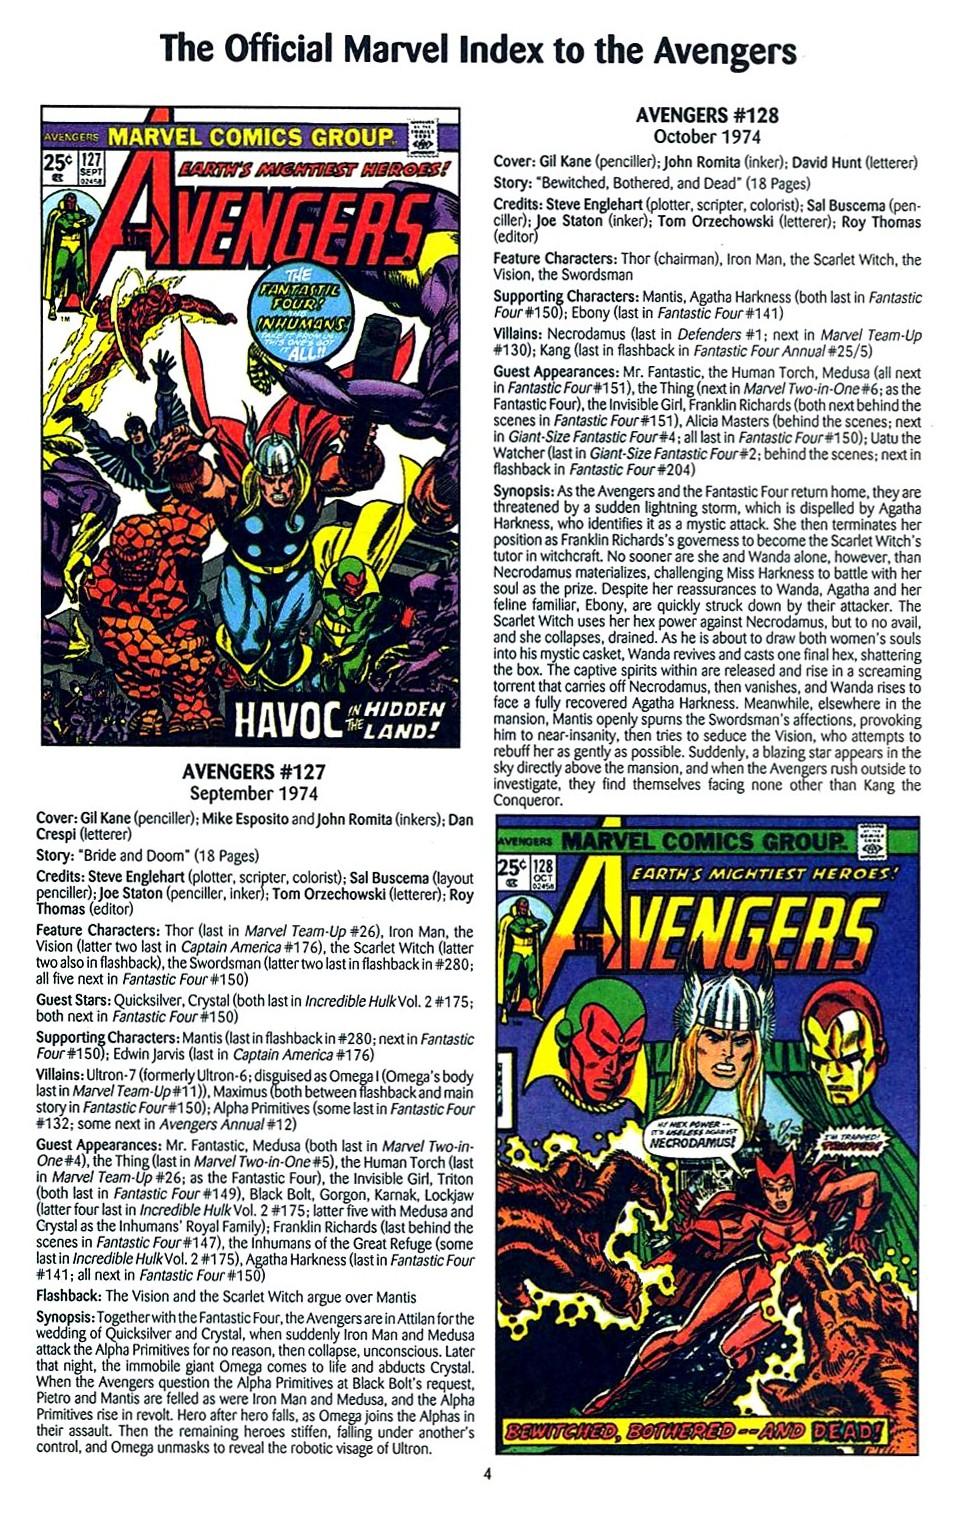 Read online The Official Marvel Index to the Avengers comic -  Issue #3 - 6